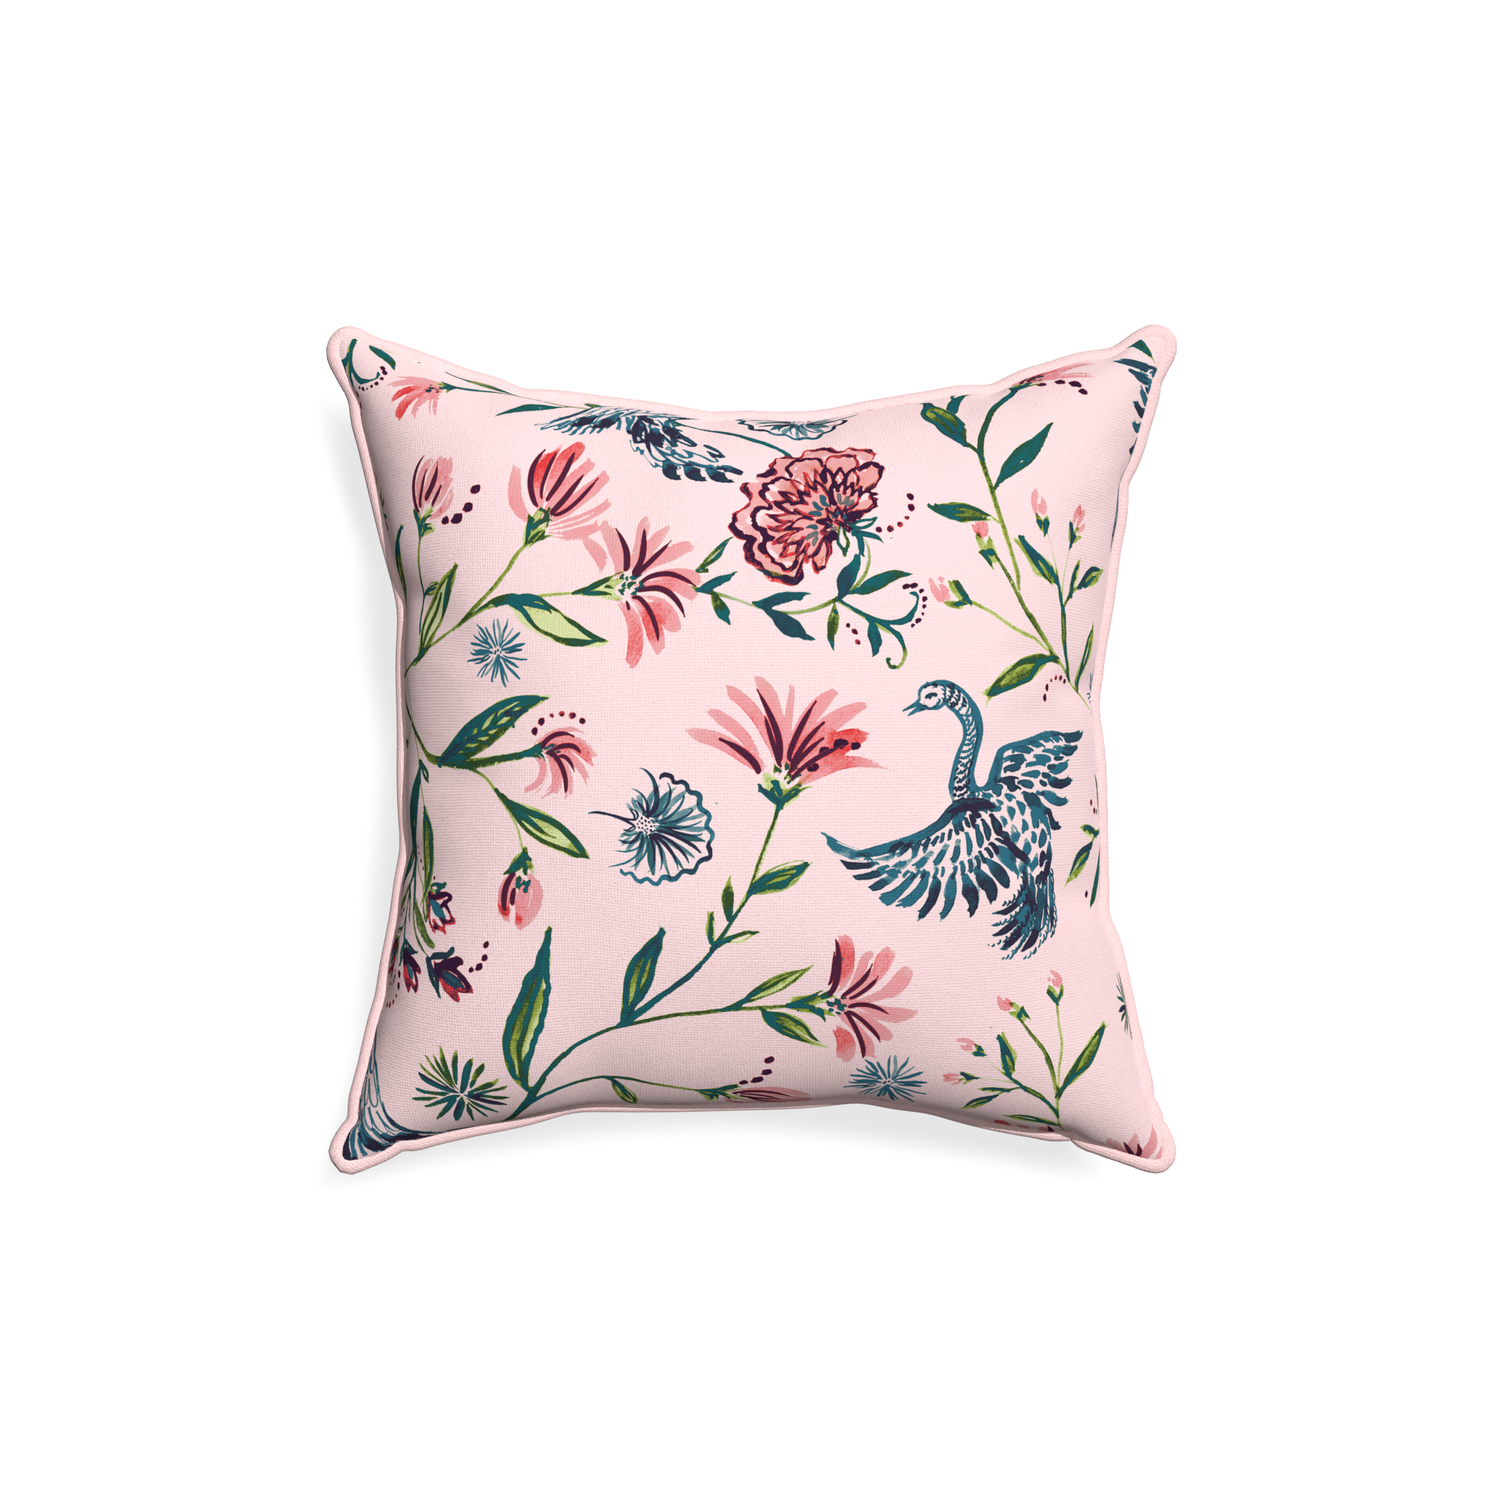 18-square daphne rose custom pillow with petal piping on white background